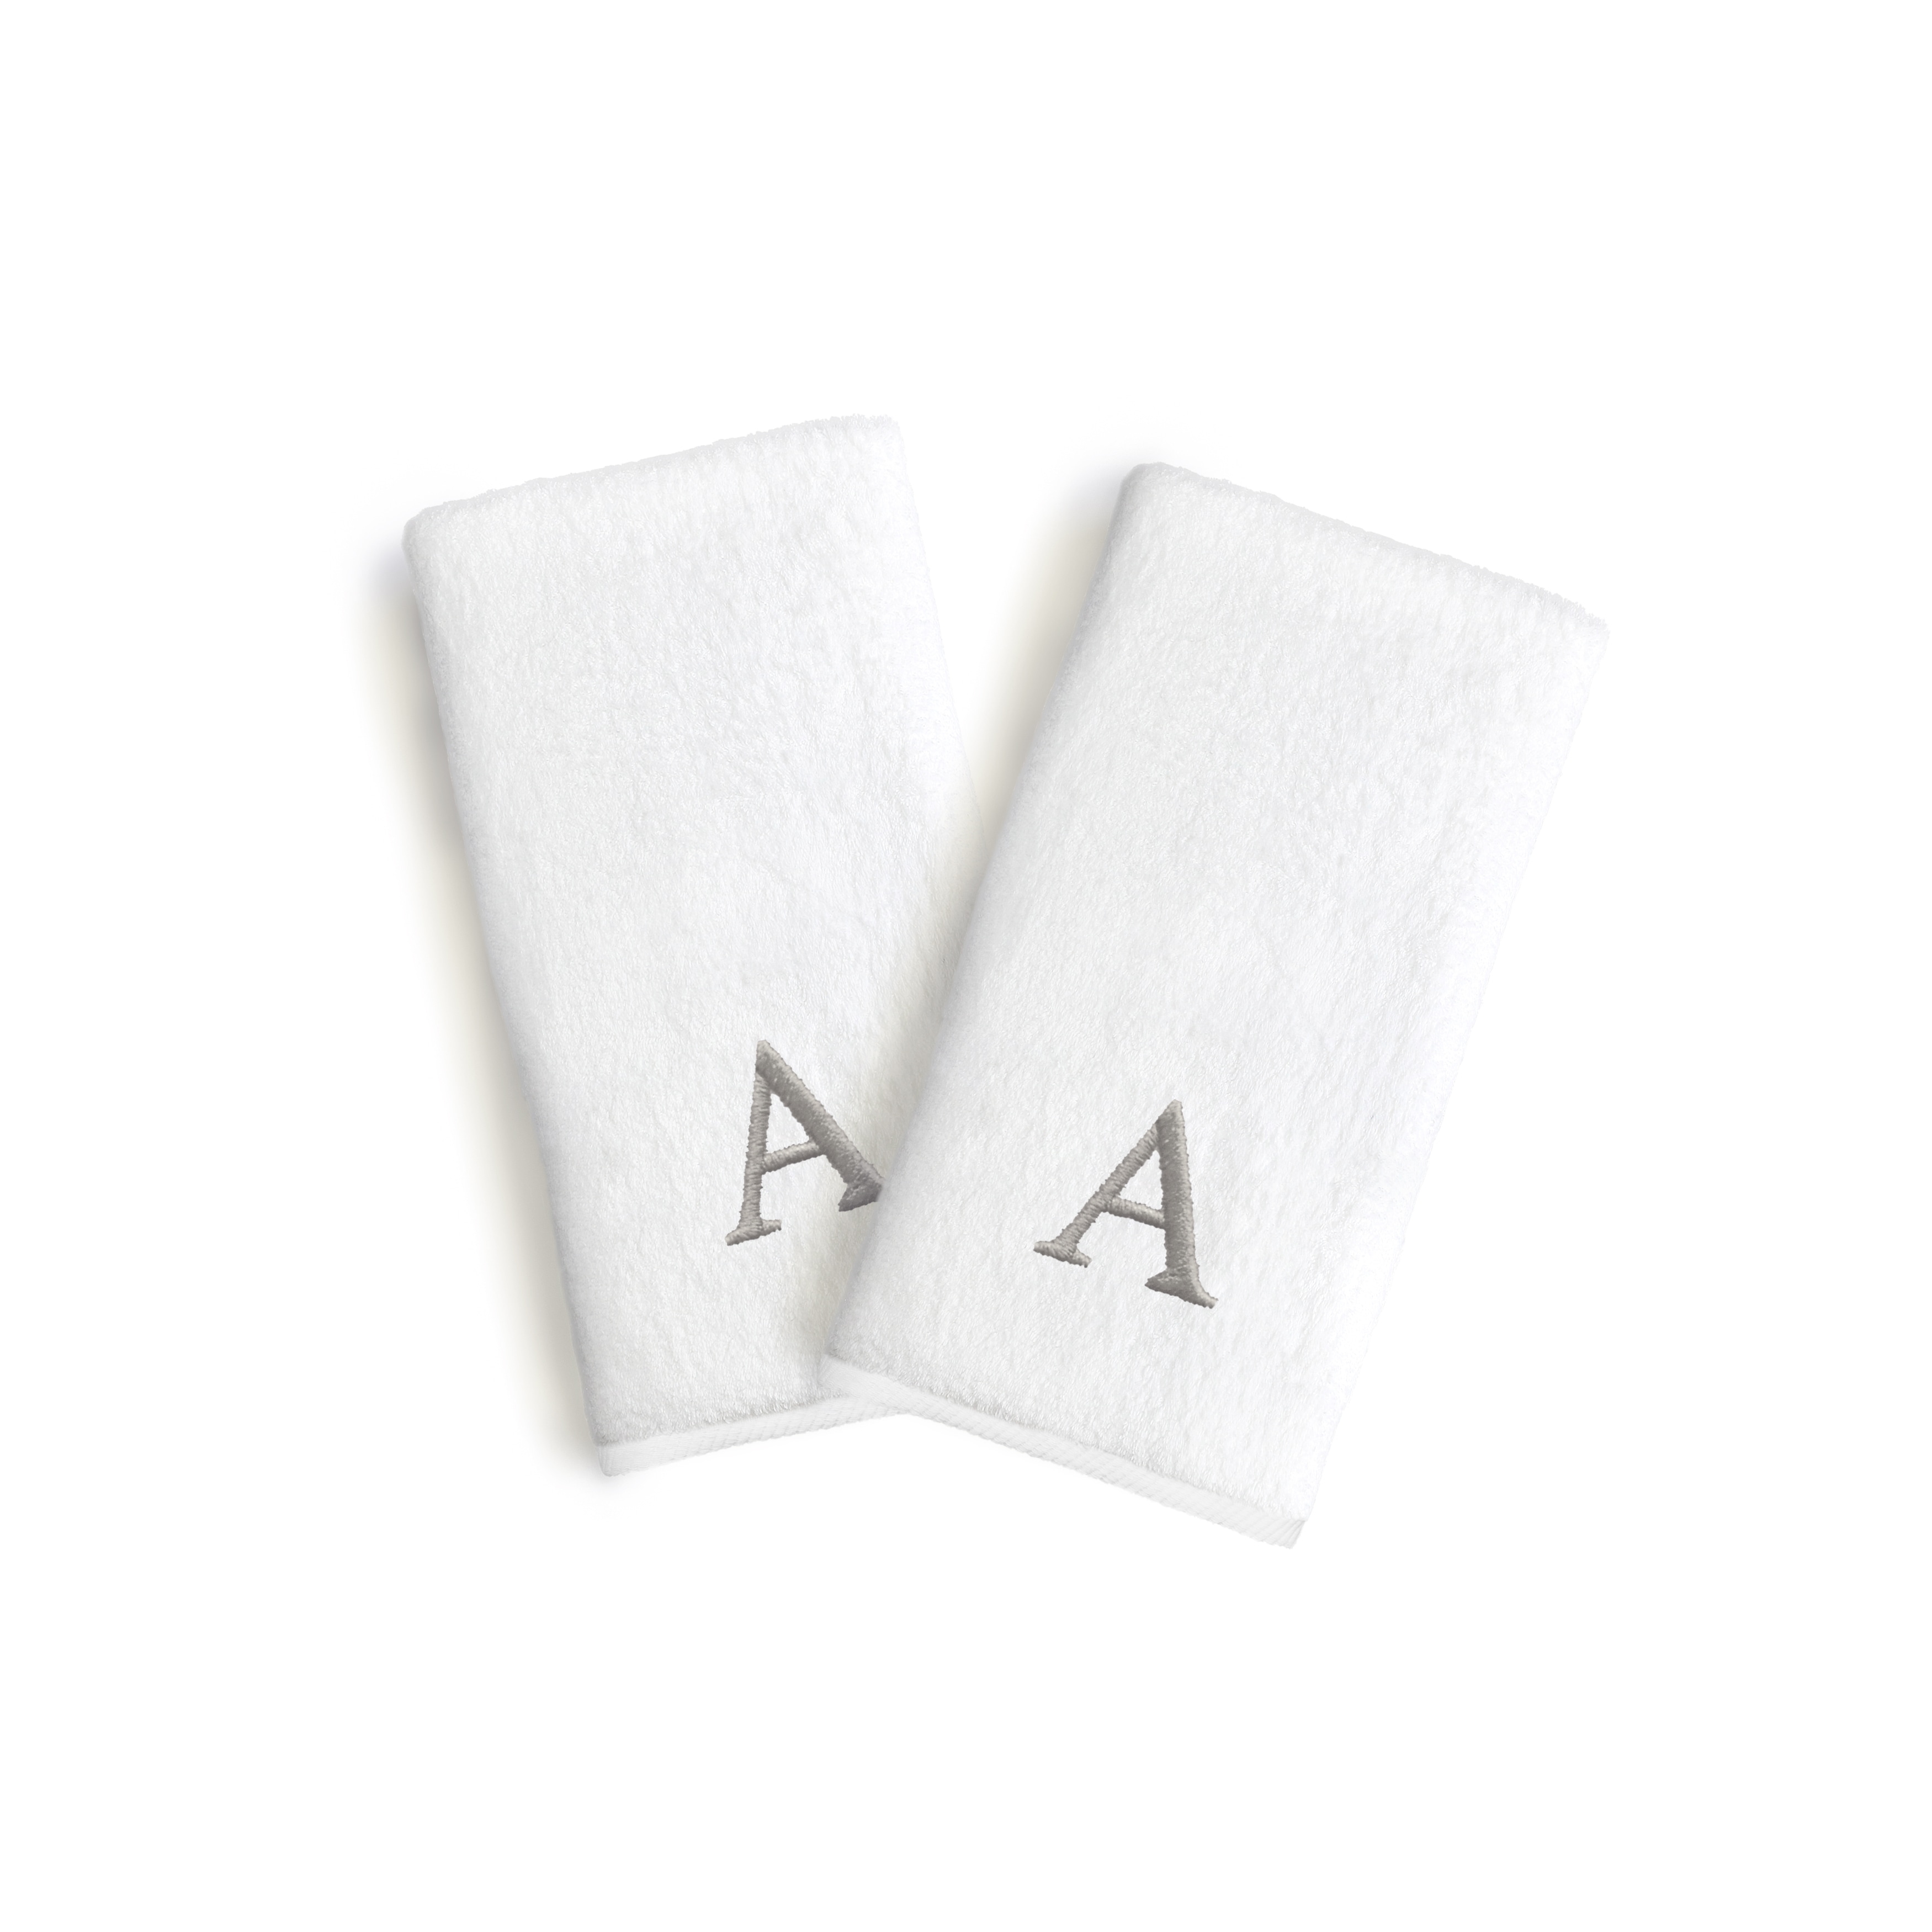 Monogrammed Hand Towel, Personalized Gift, 16 x 30 Inches - Set of 2 -  Silver Embroidered Towel - Extra Absorbent 100% Turkish Cotton- Soft Terry